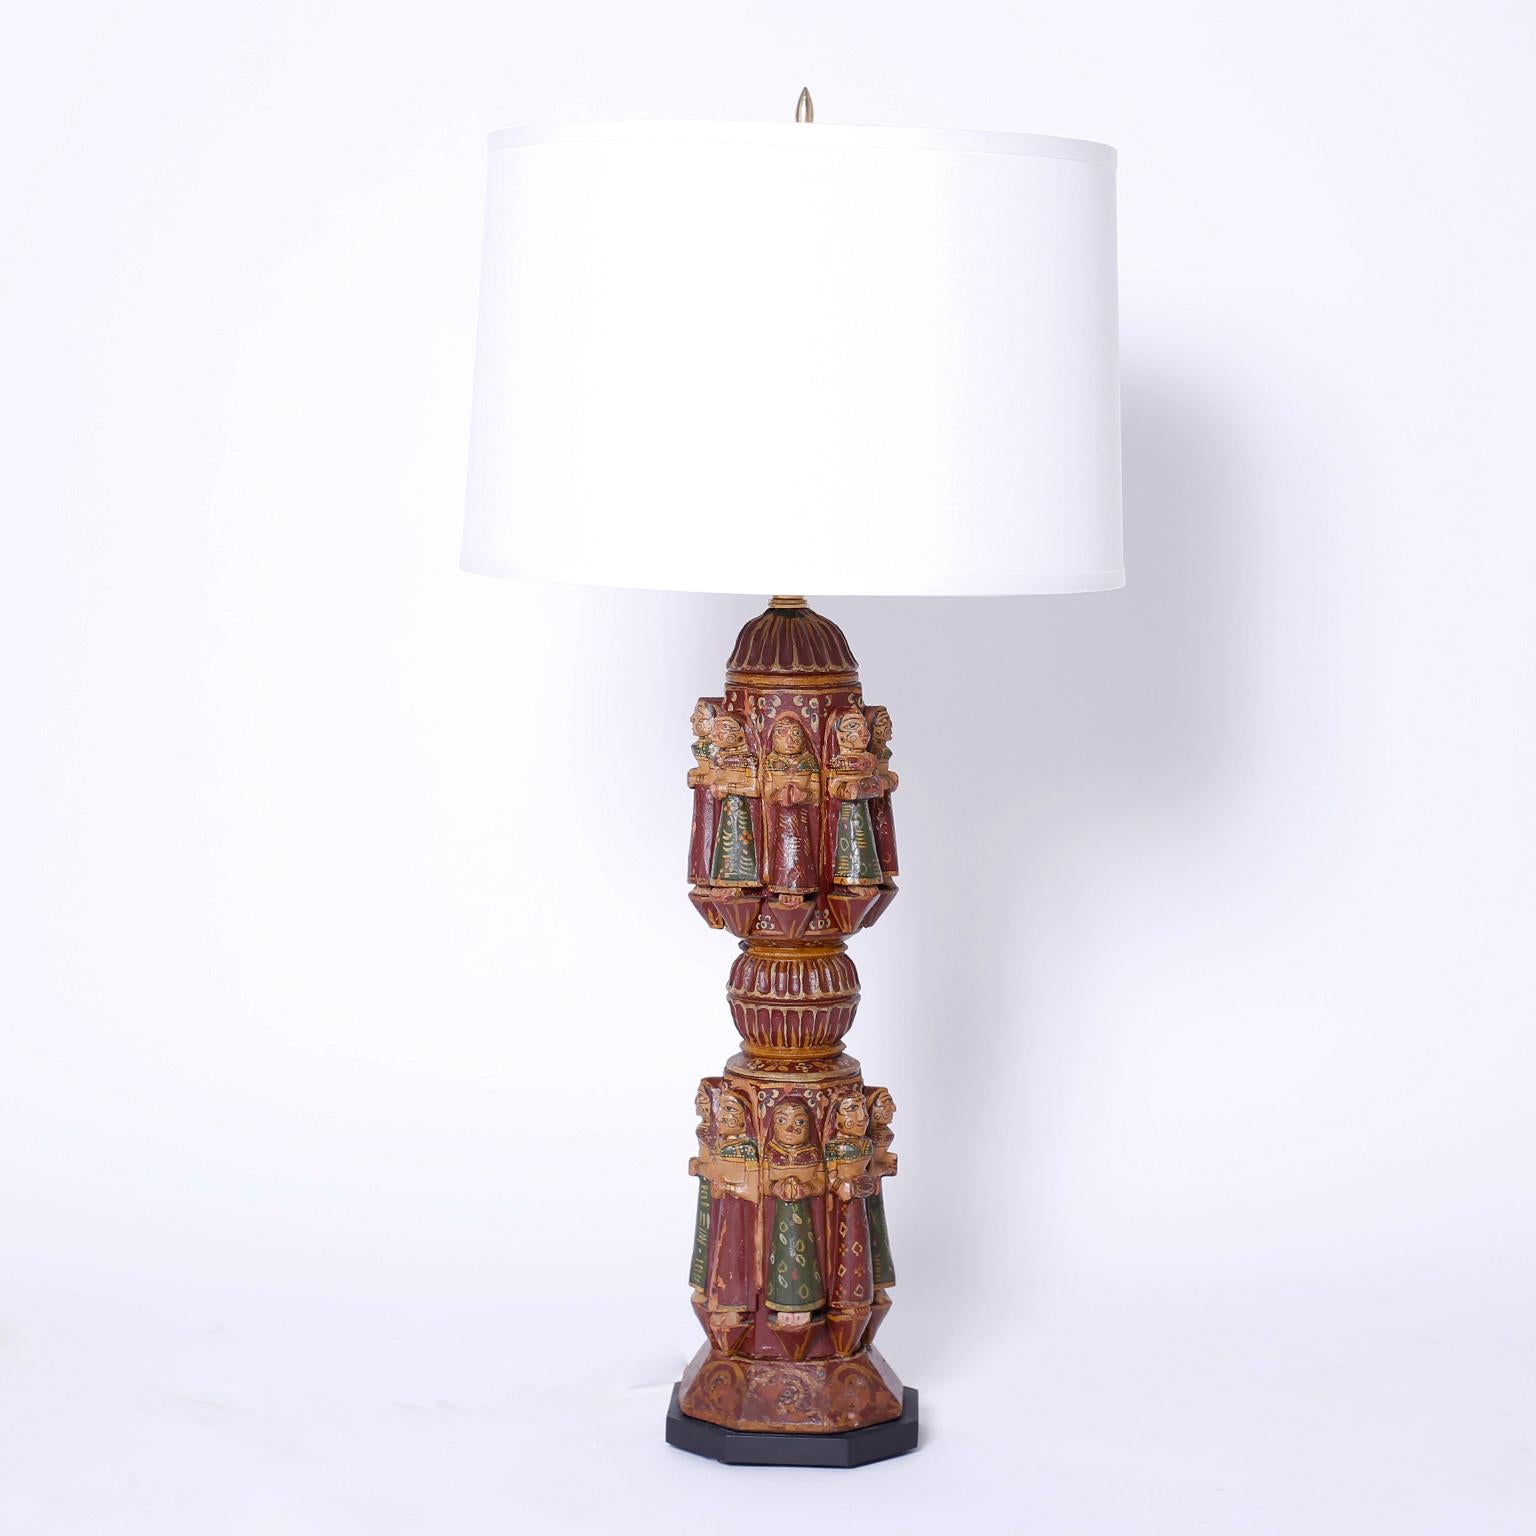 Pair of antique bed posts now table lamps carved and polychromed wood with two tiers of maidens in festive garb.